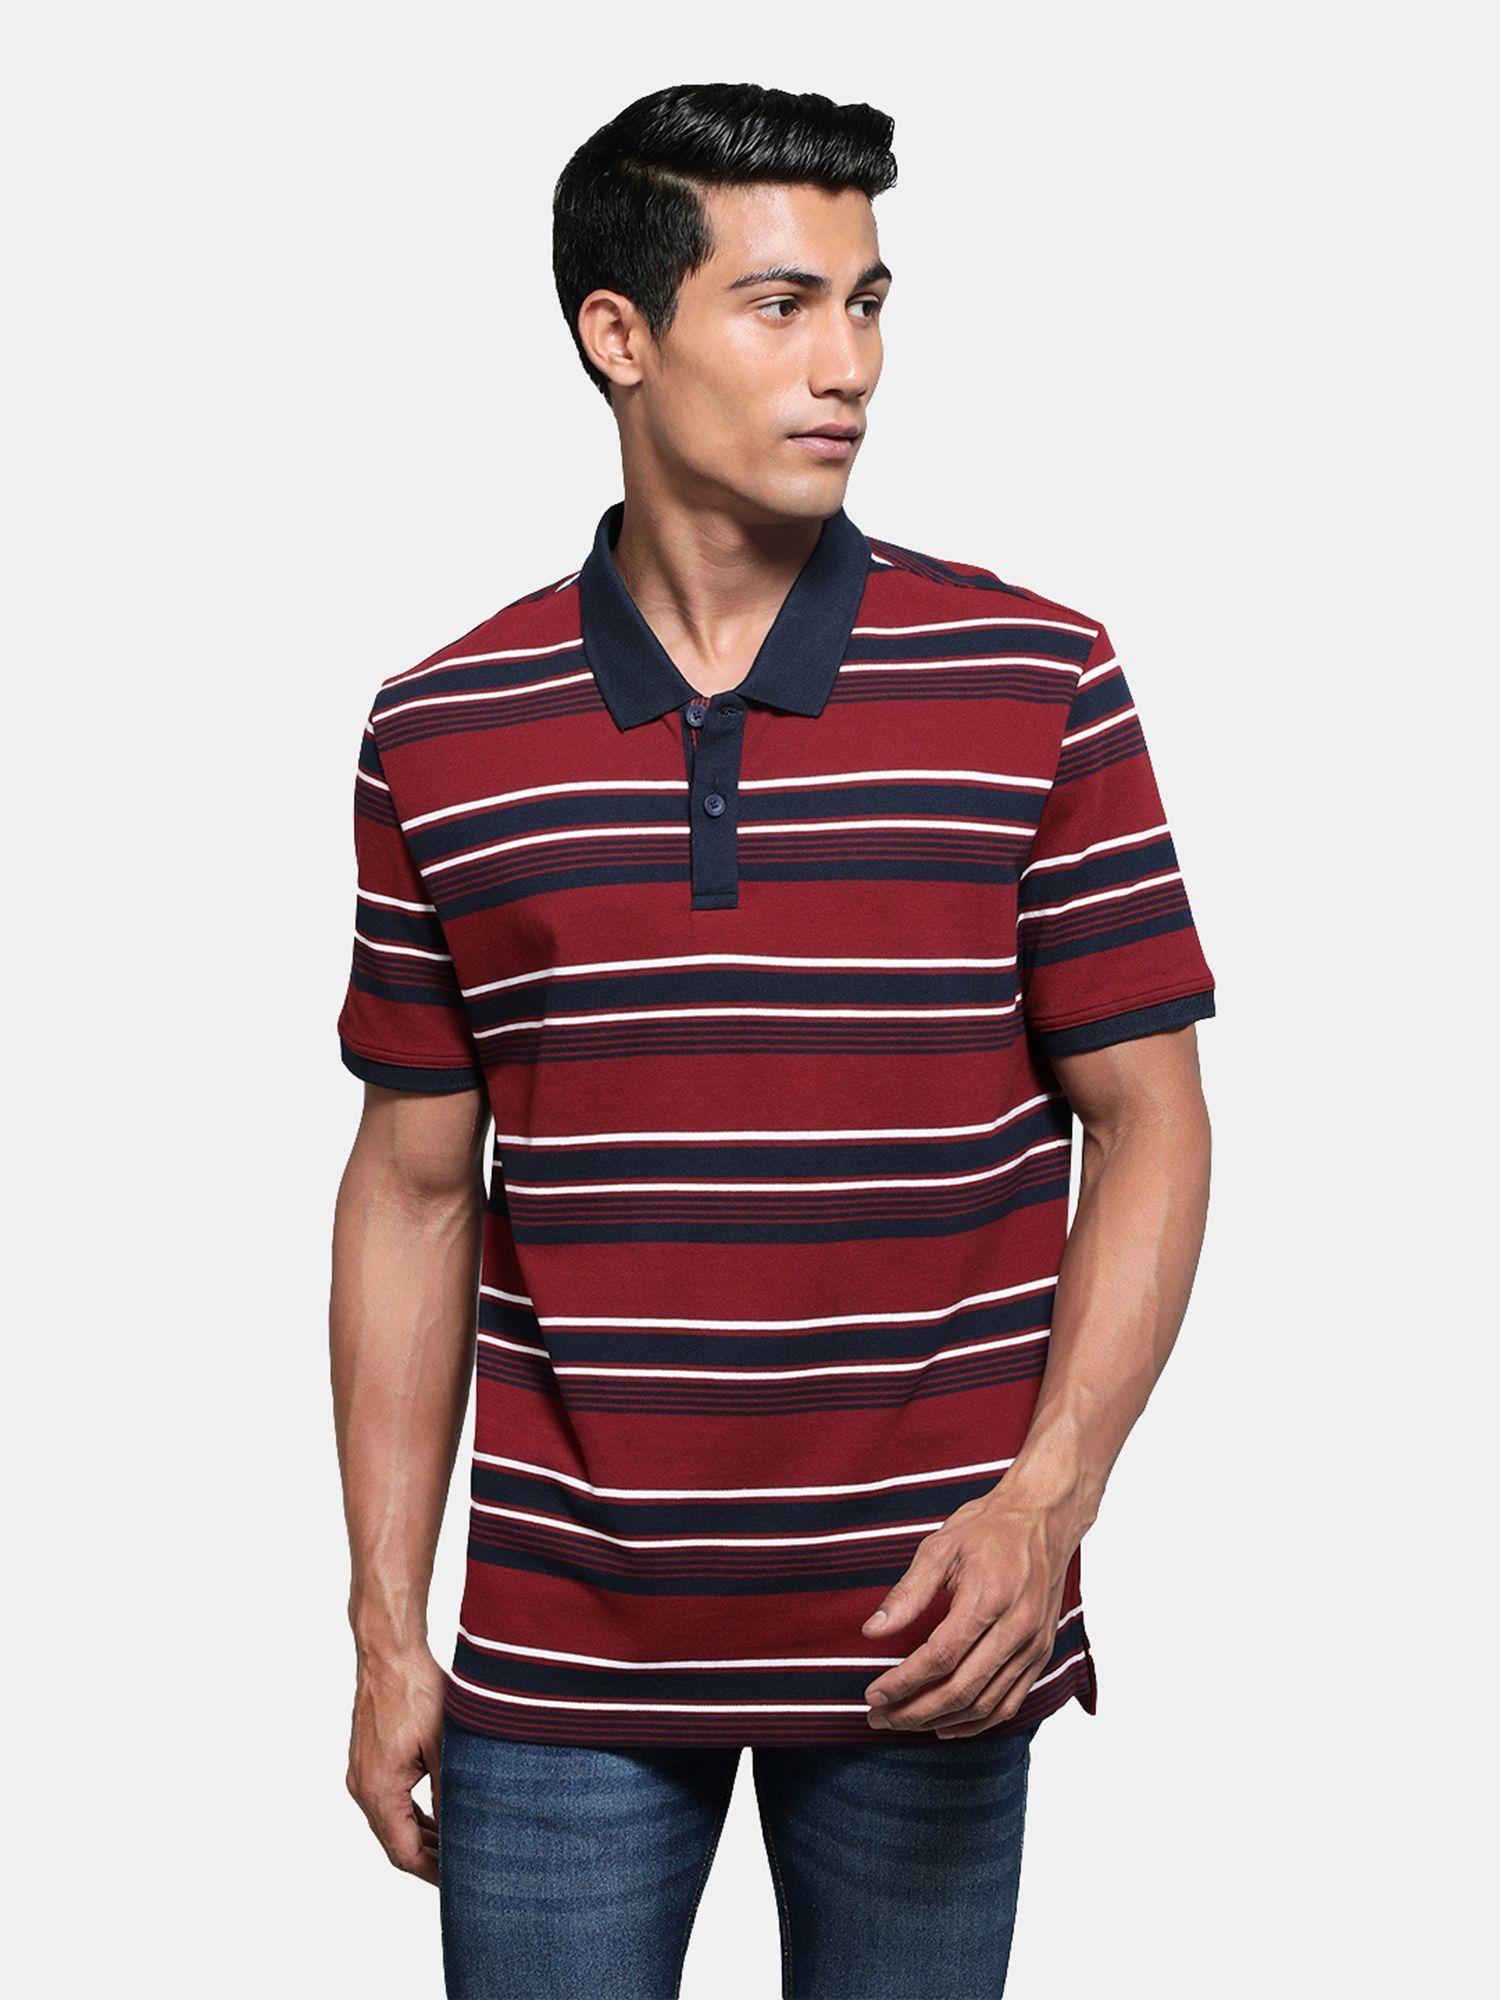 men super combed cotton rich striped polo t-shirt deep red & navy